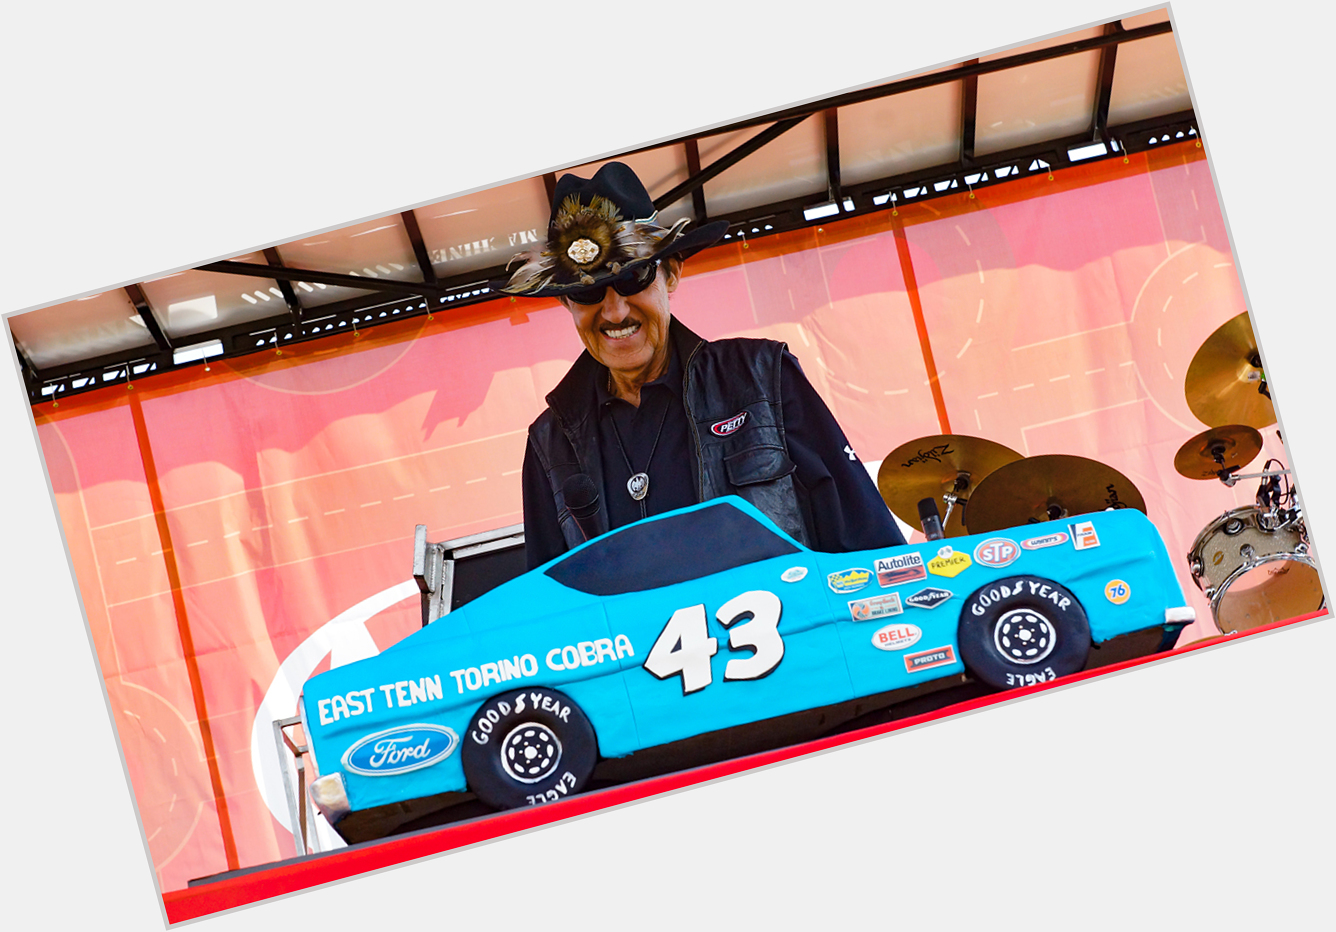 Happy Birthday to The King, Richard Petty!
We hope you\re enjoying a cake just like this one! 